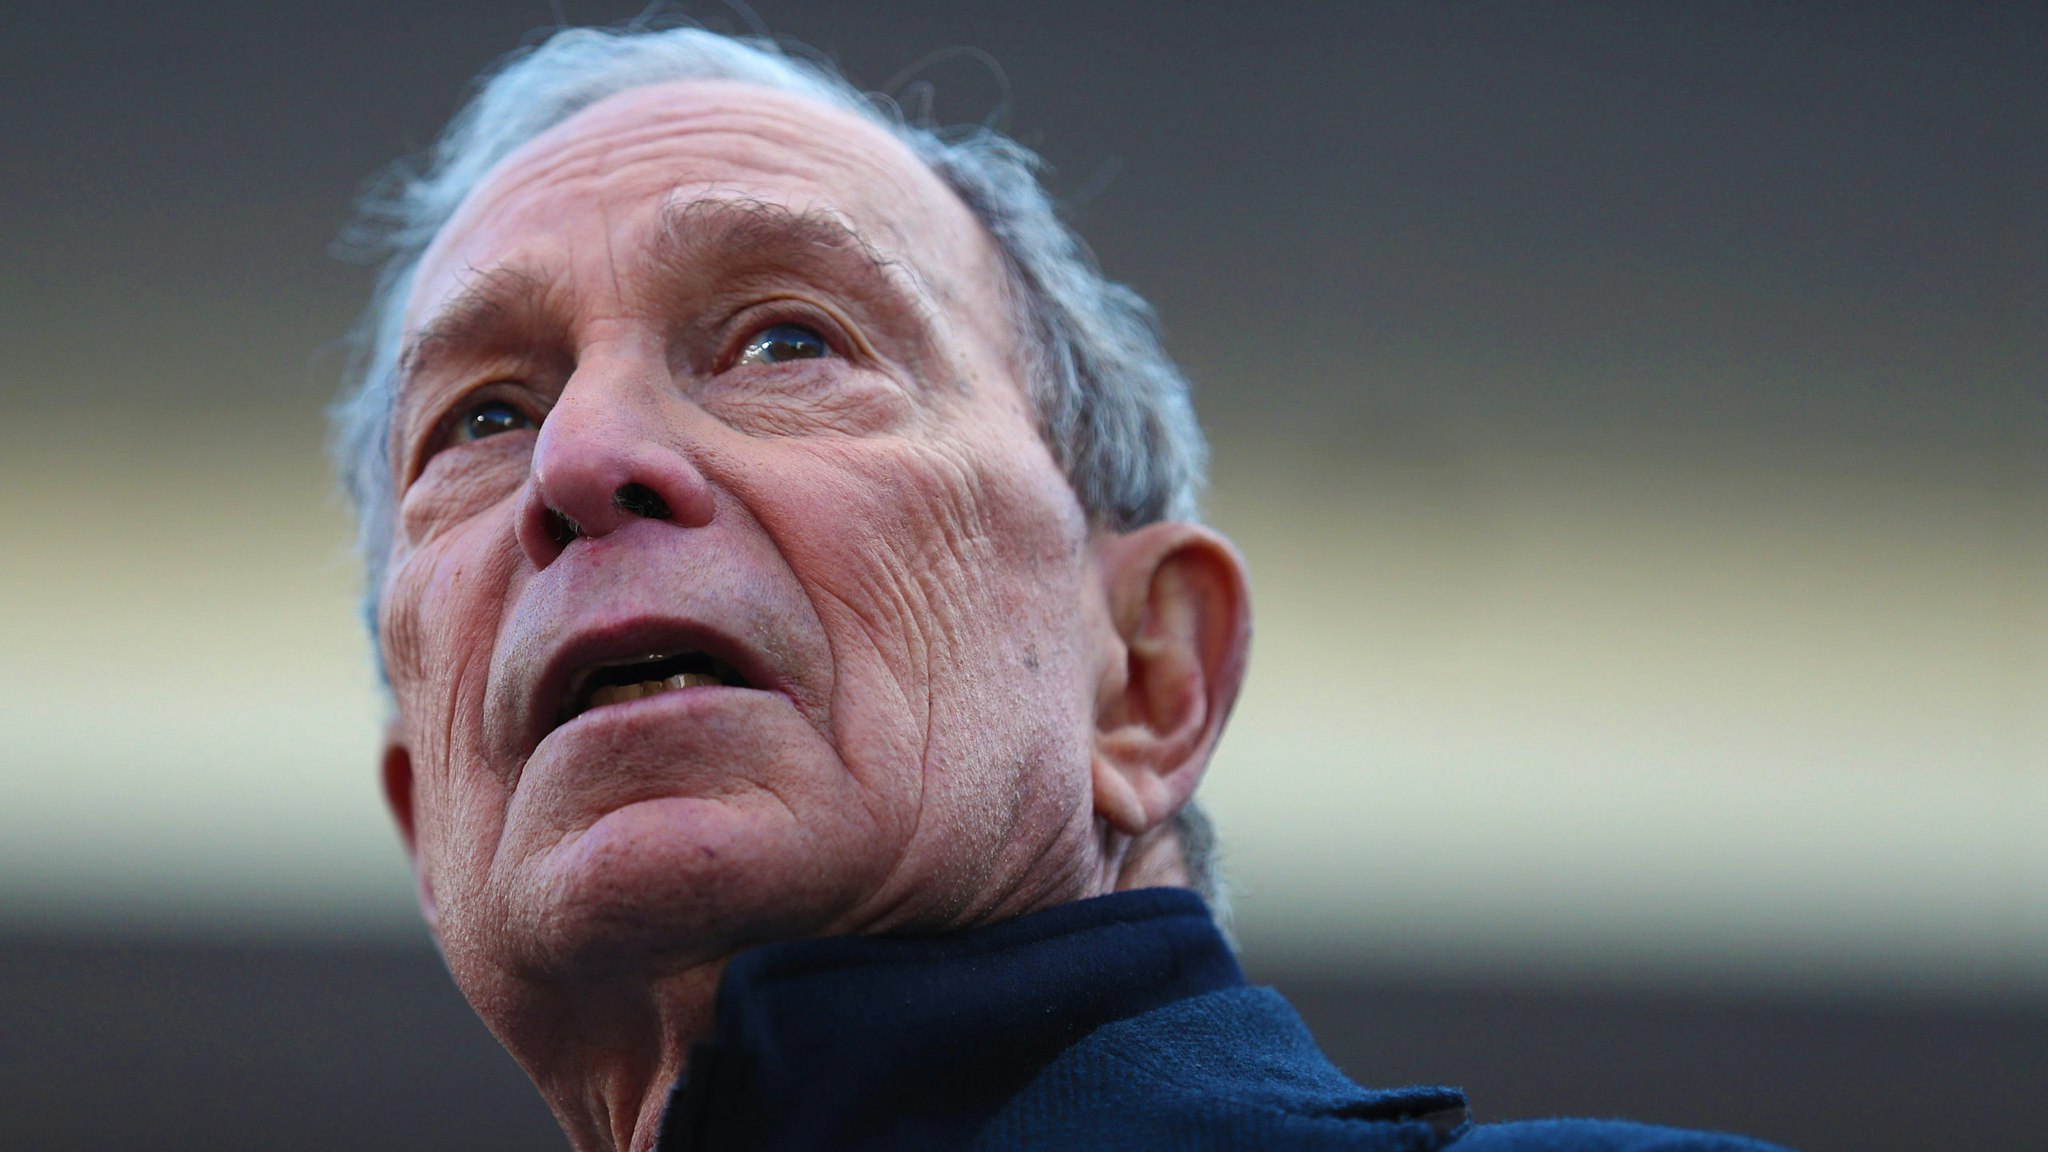 WILMINGTON, NC - FEBRUARY 29: Democratic presidential candidate, former New York City mayor Mike Bloomberg speaks during a campaign rally held at the Emsley A. Laney High School on February 29, 2020 in Wilmington, North Carolina. Bloomberg is campaigning before voting starts on Super Tuesday, March 3.